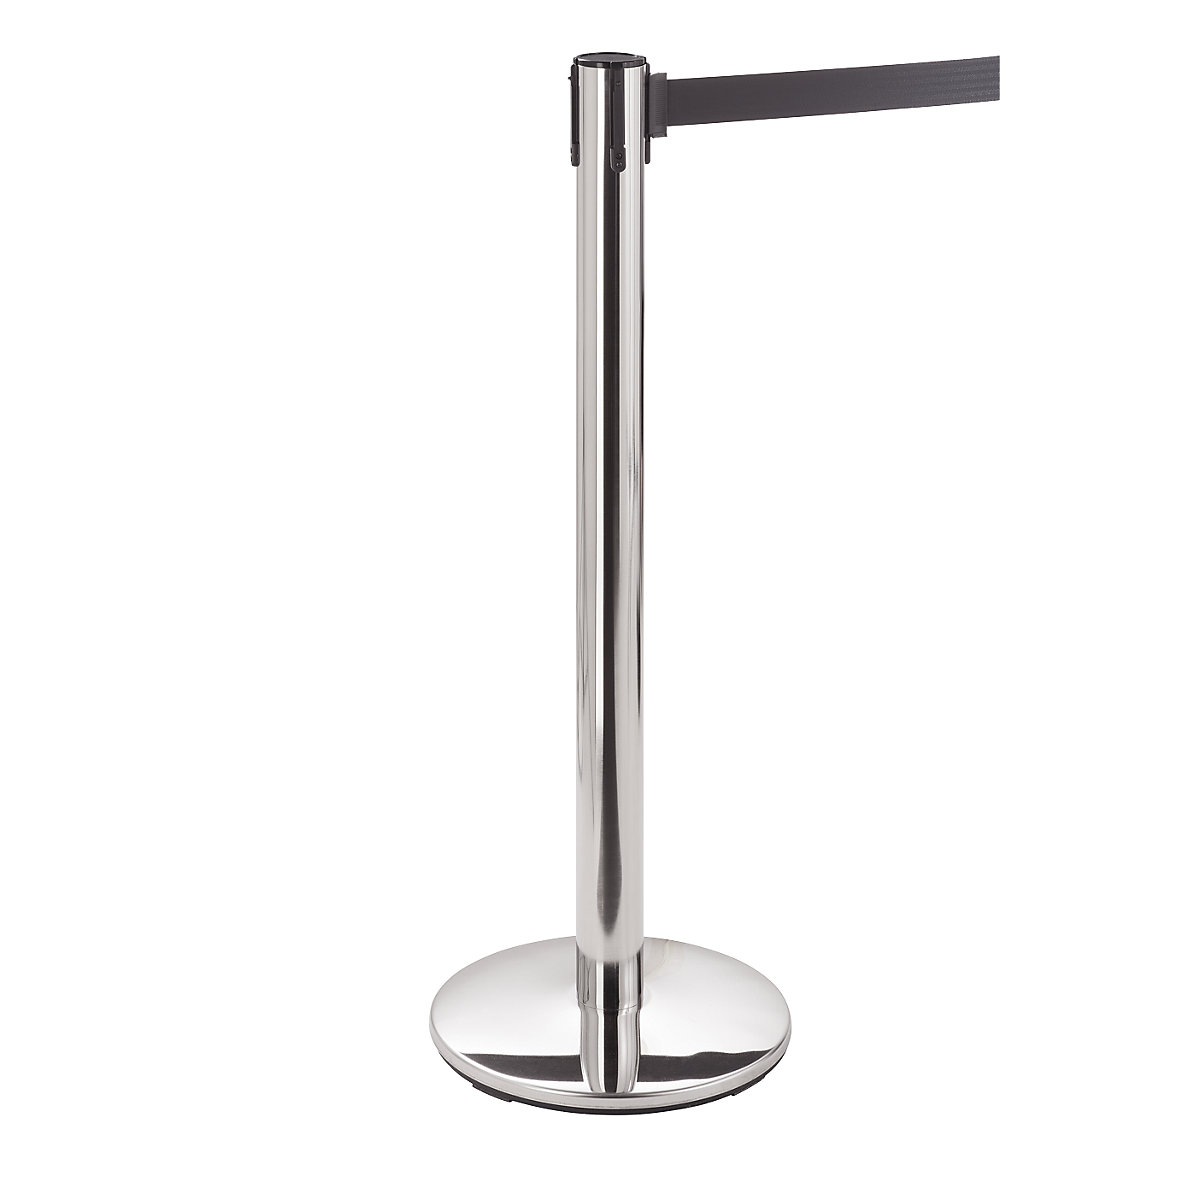 Guidance system, metal posts, height 968 mm, chrome plated-5